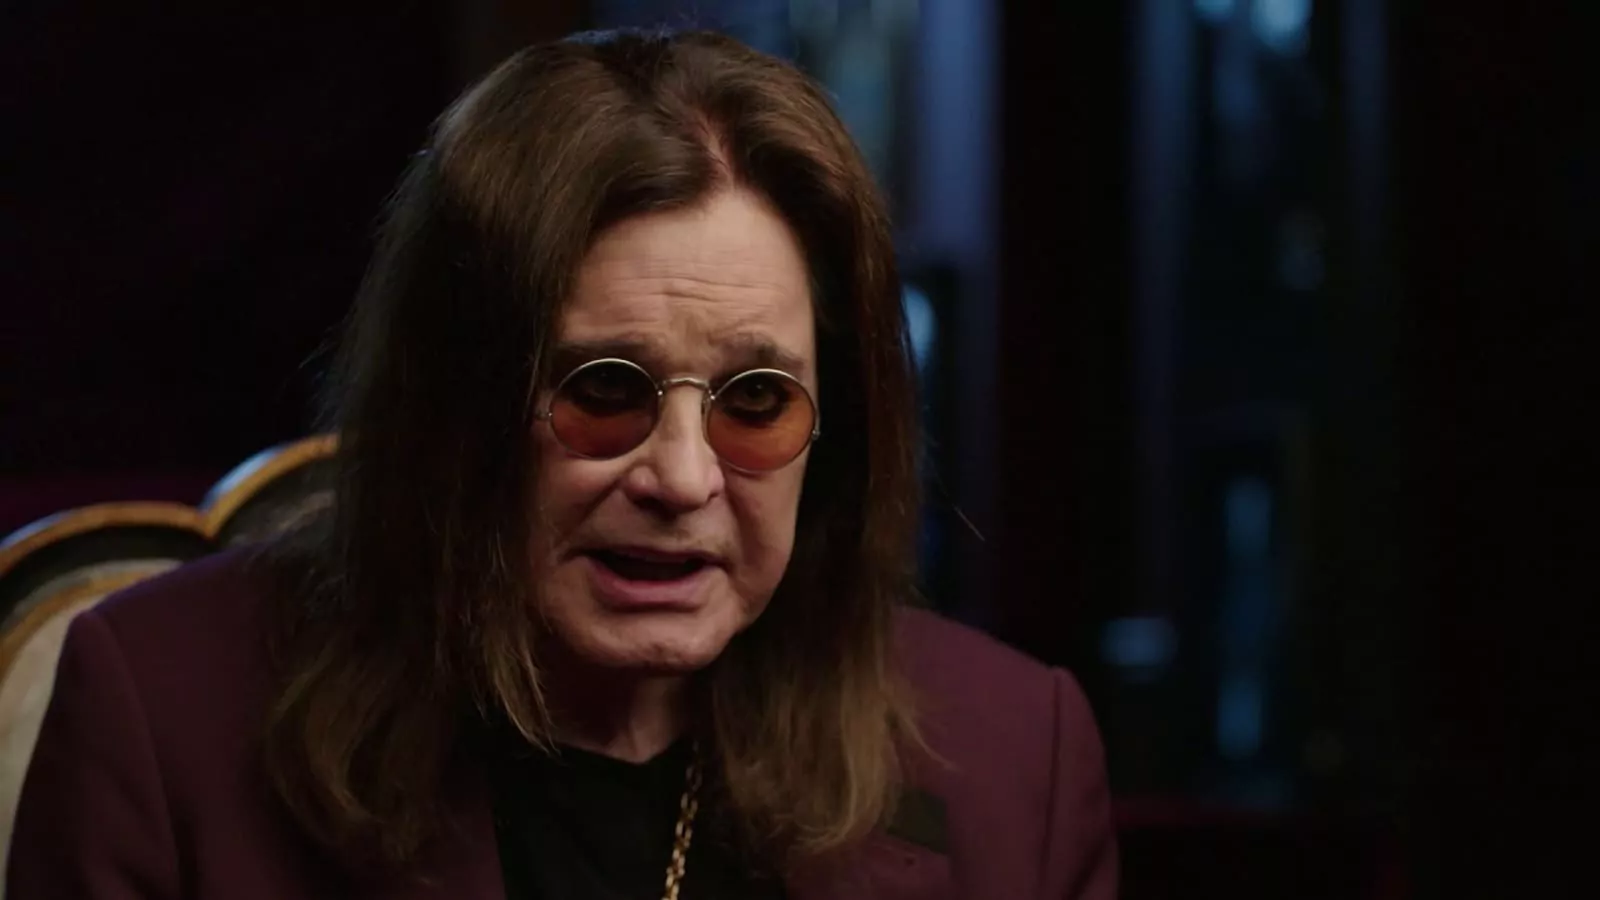 When did Ozzy Osbourne leave from Black Sabbath?